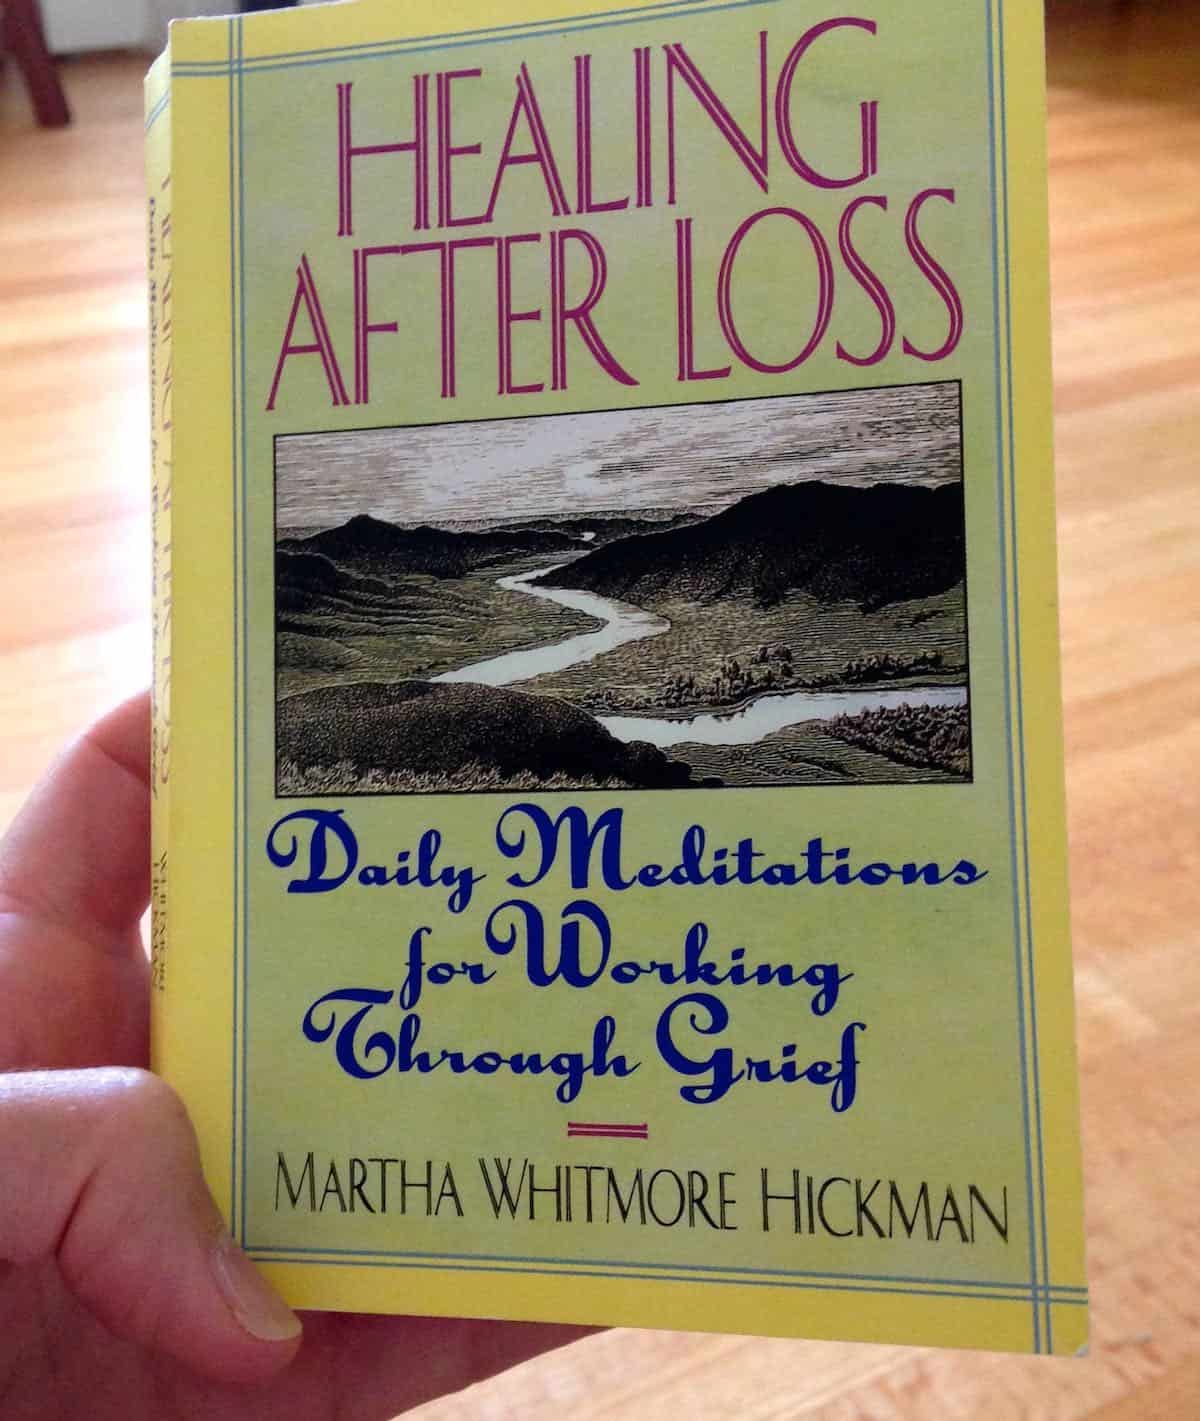 Healing After Loss book cover.